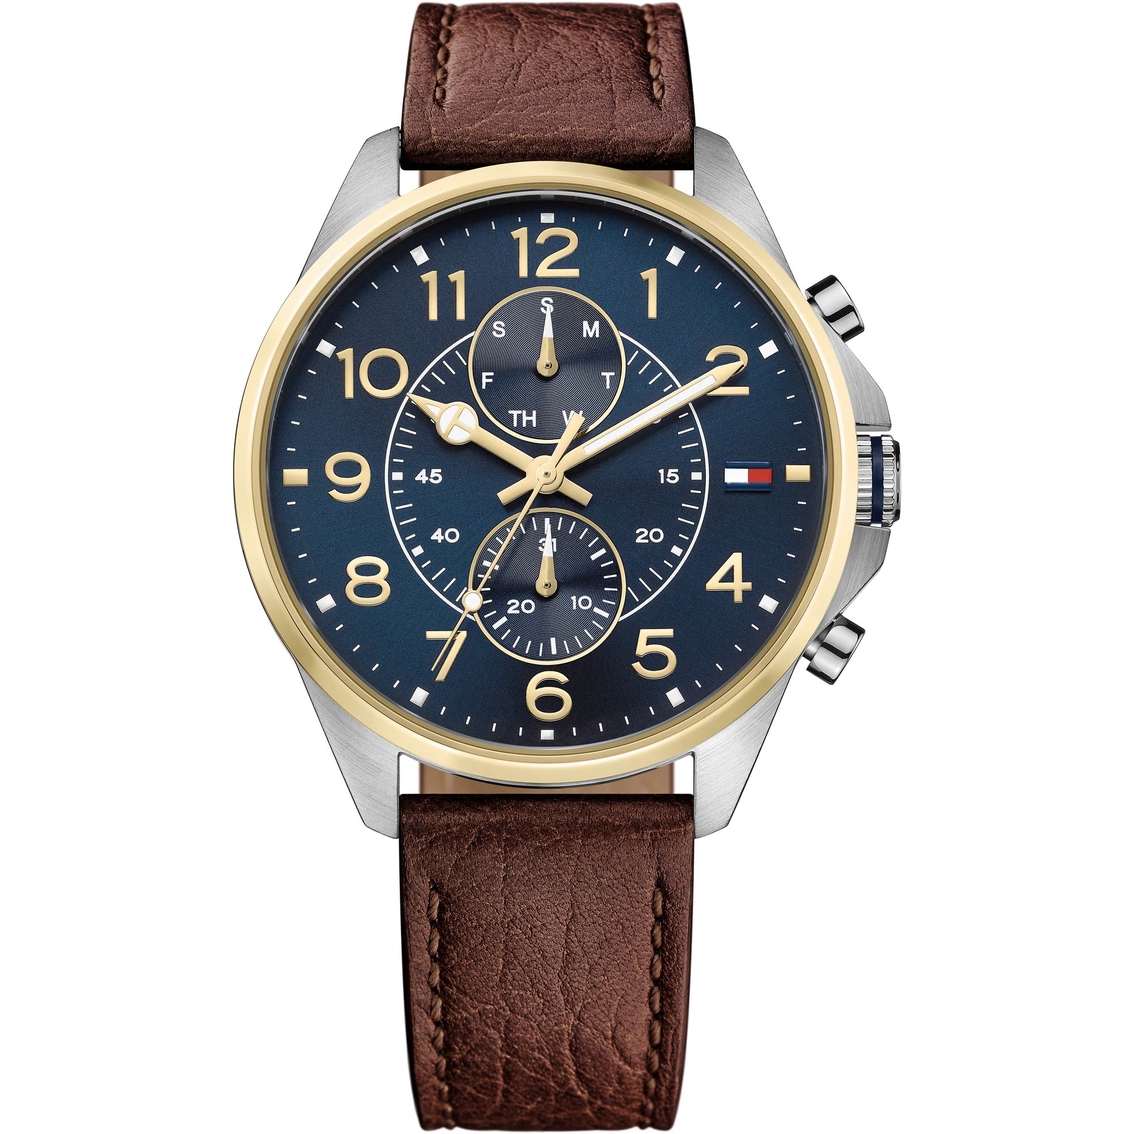 Tommy Hilfiger Men's Dean 46mm Watch 179127 | Leather Band | Jewelry ...